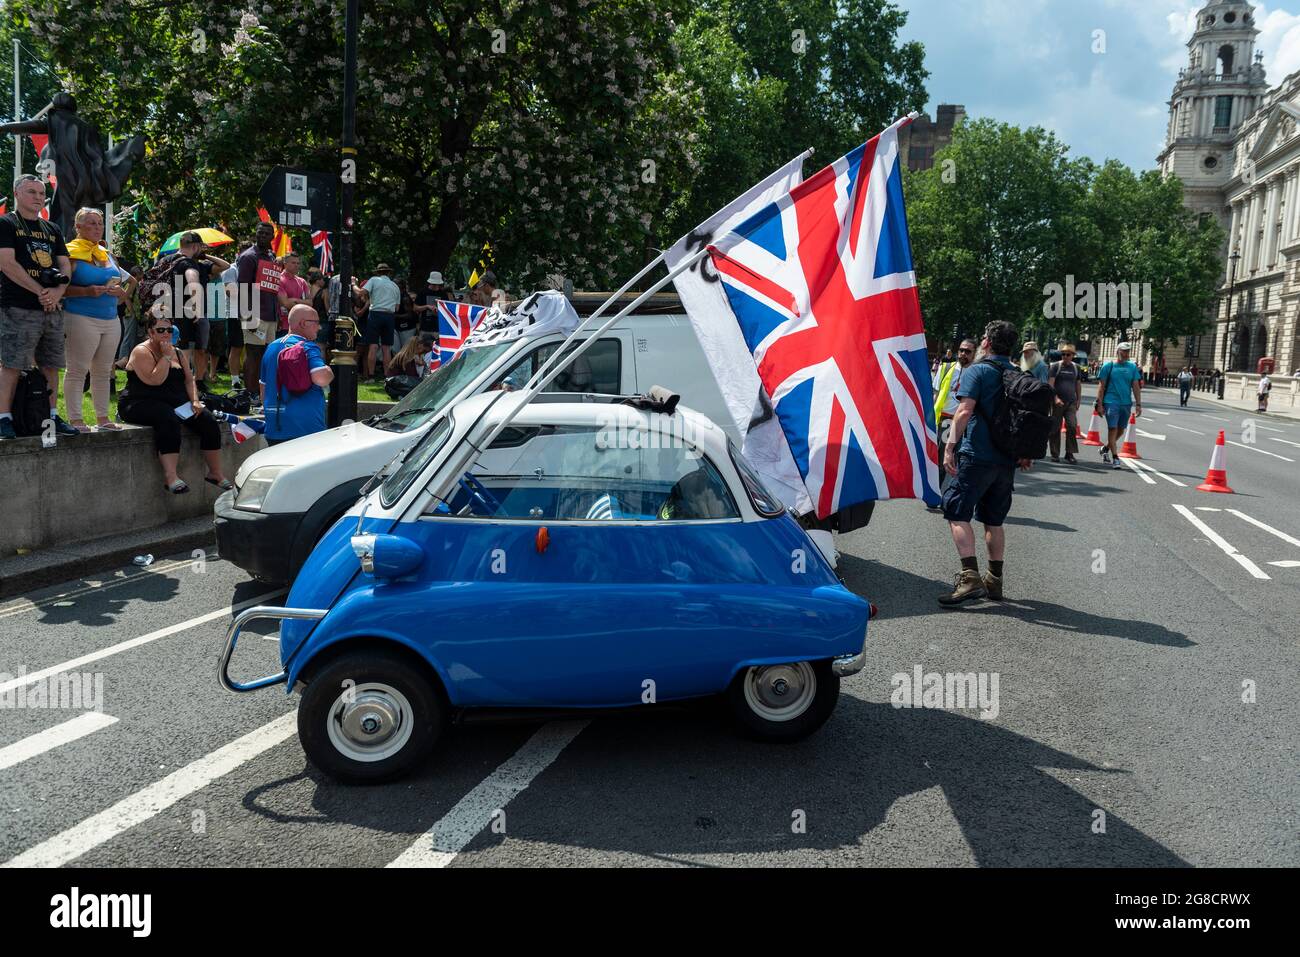 London, UK.  19 July 2021.  Vehicles brought to an anti-vaccine protest in Parliament Square, on what has been dubbed Freedom Day, when the UK government relaxed remaining coronavirus lockdown restrictions but the numbers of positive cases continues to increase daily and scientists are concerned that restrictions have been eased too soon. Credit: Stephen Chung / Alamy Live News Stock Photo